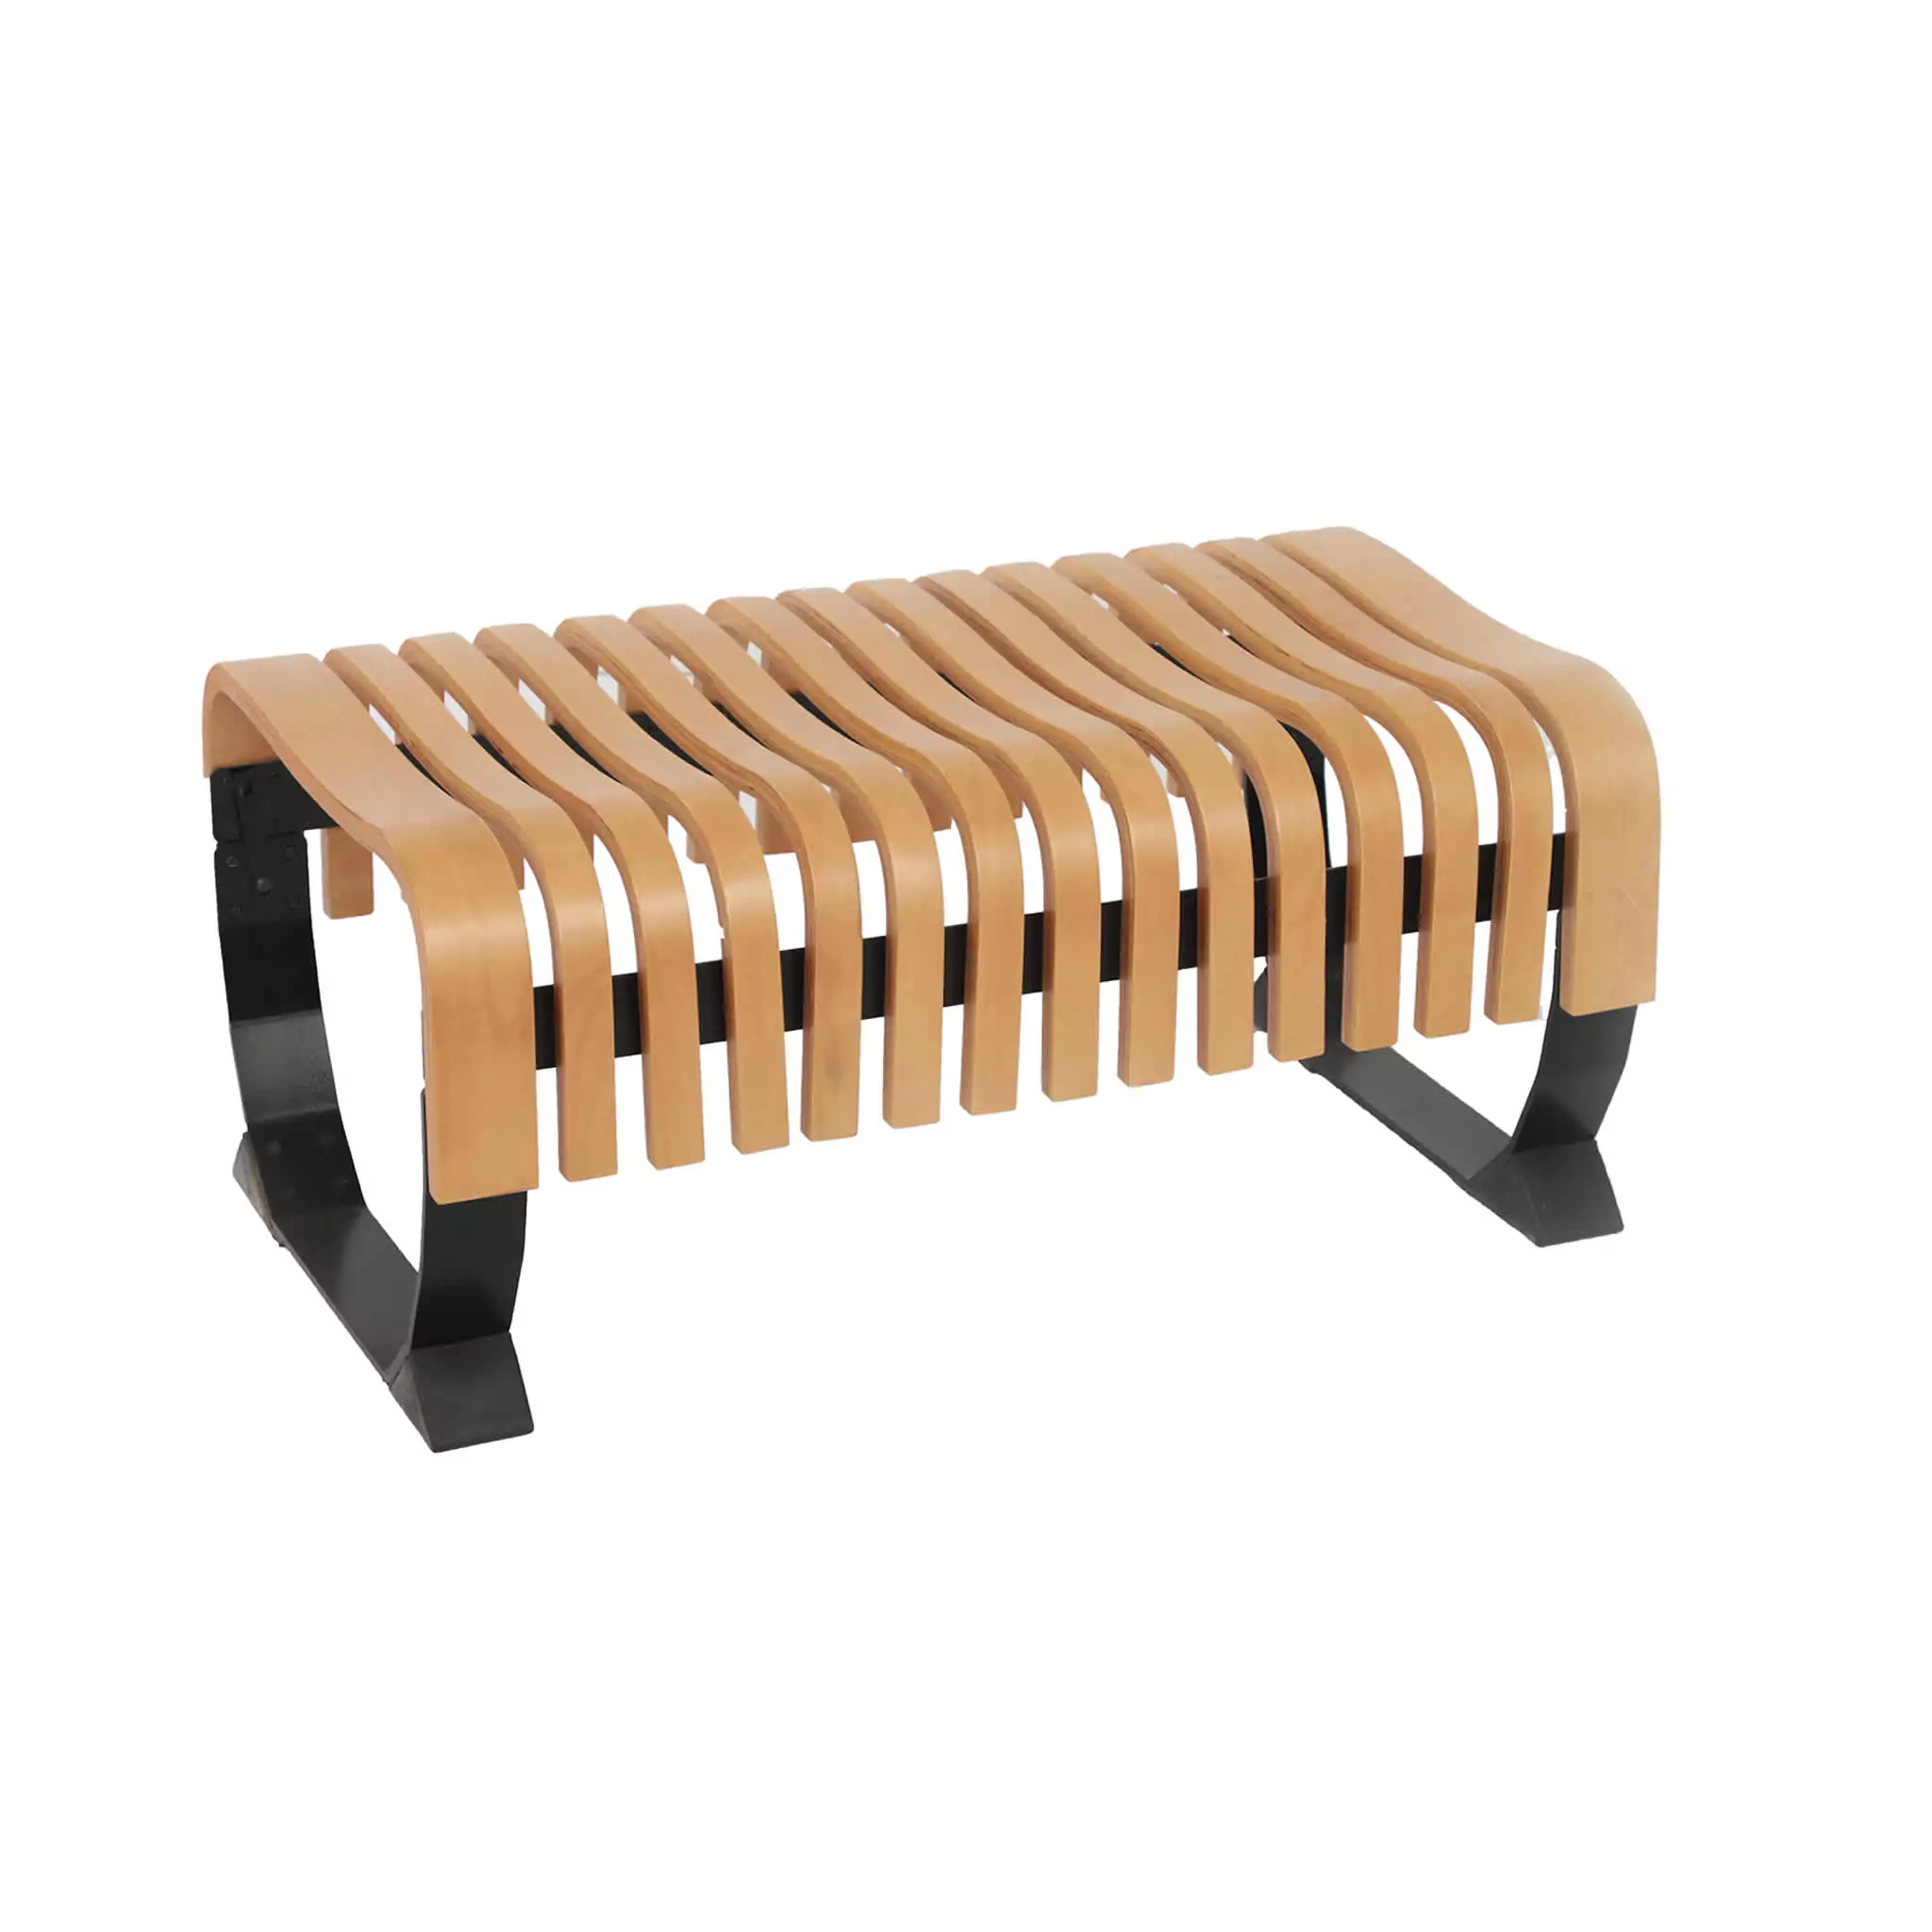 Seat Model: WOODEN BENCH